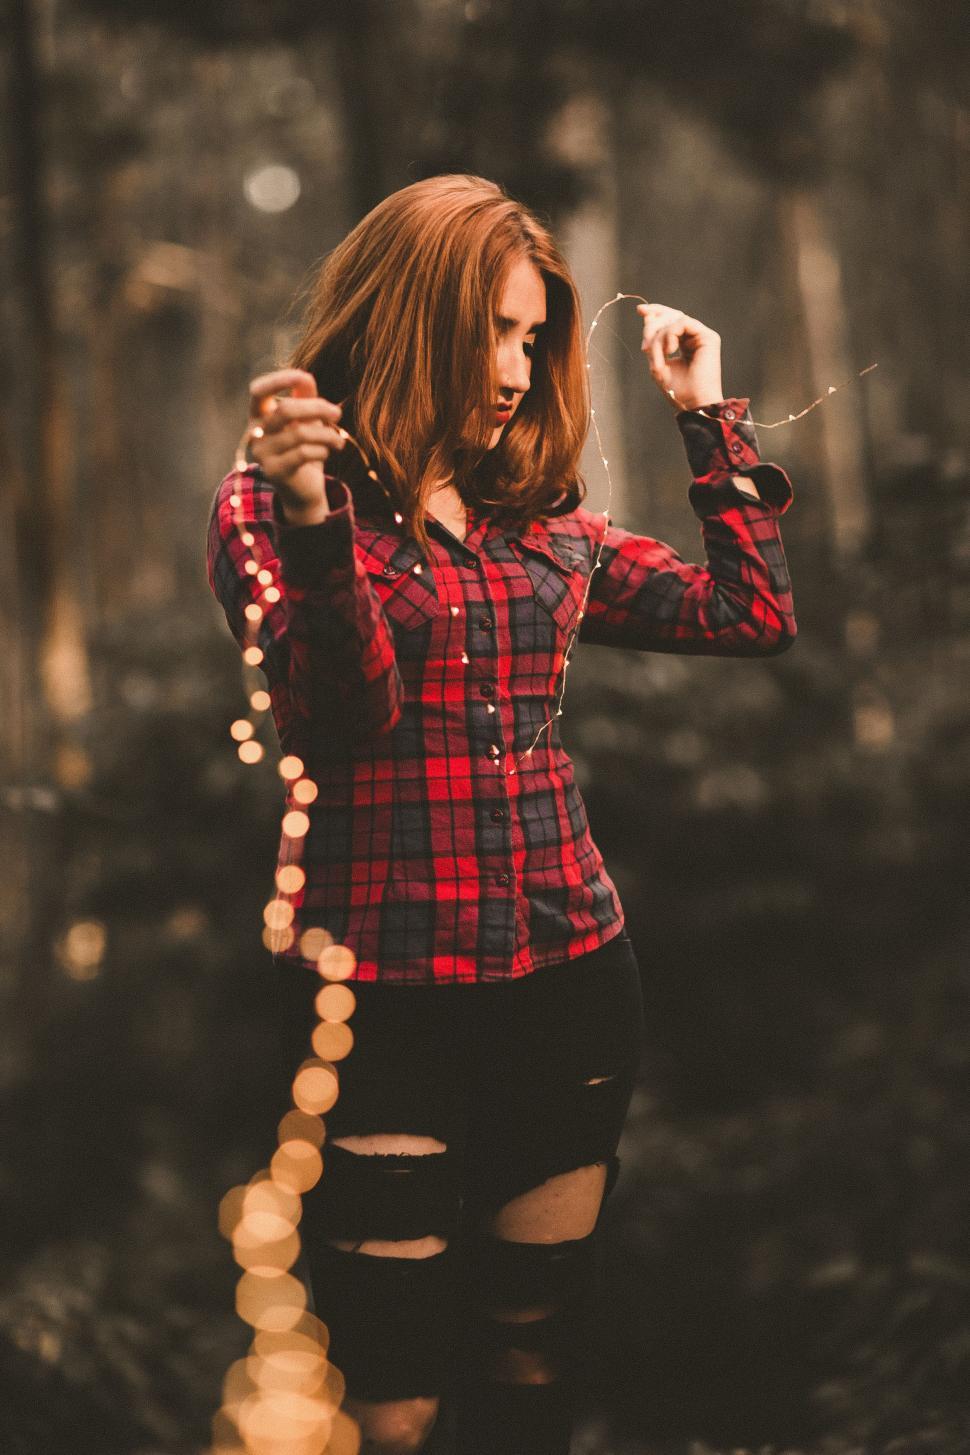 Free Image of Woman Holding Red and Black Shirt String 